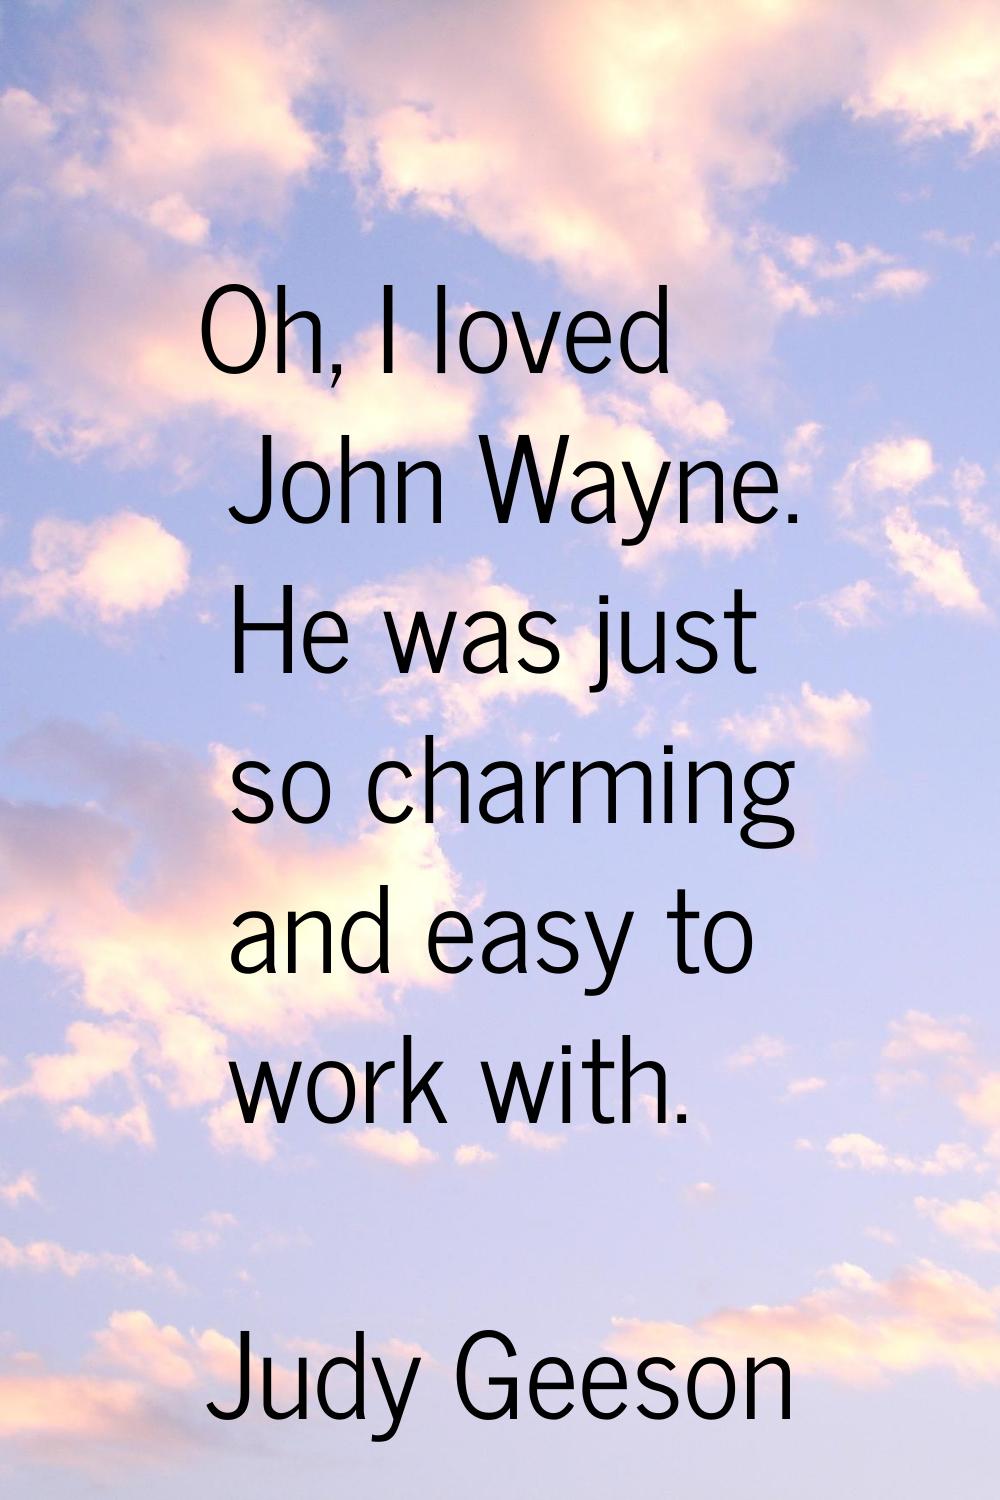 Oh, I loved John Wayne. He was just so charming and easy to work with.